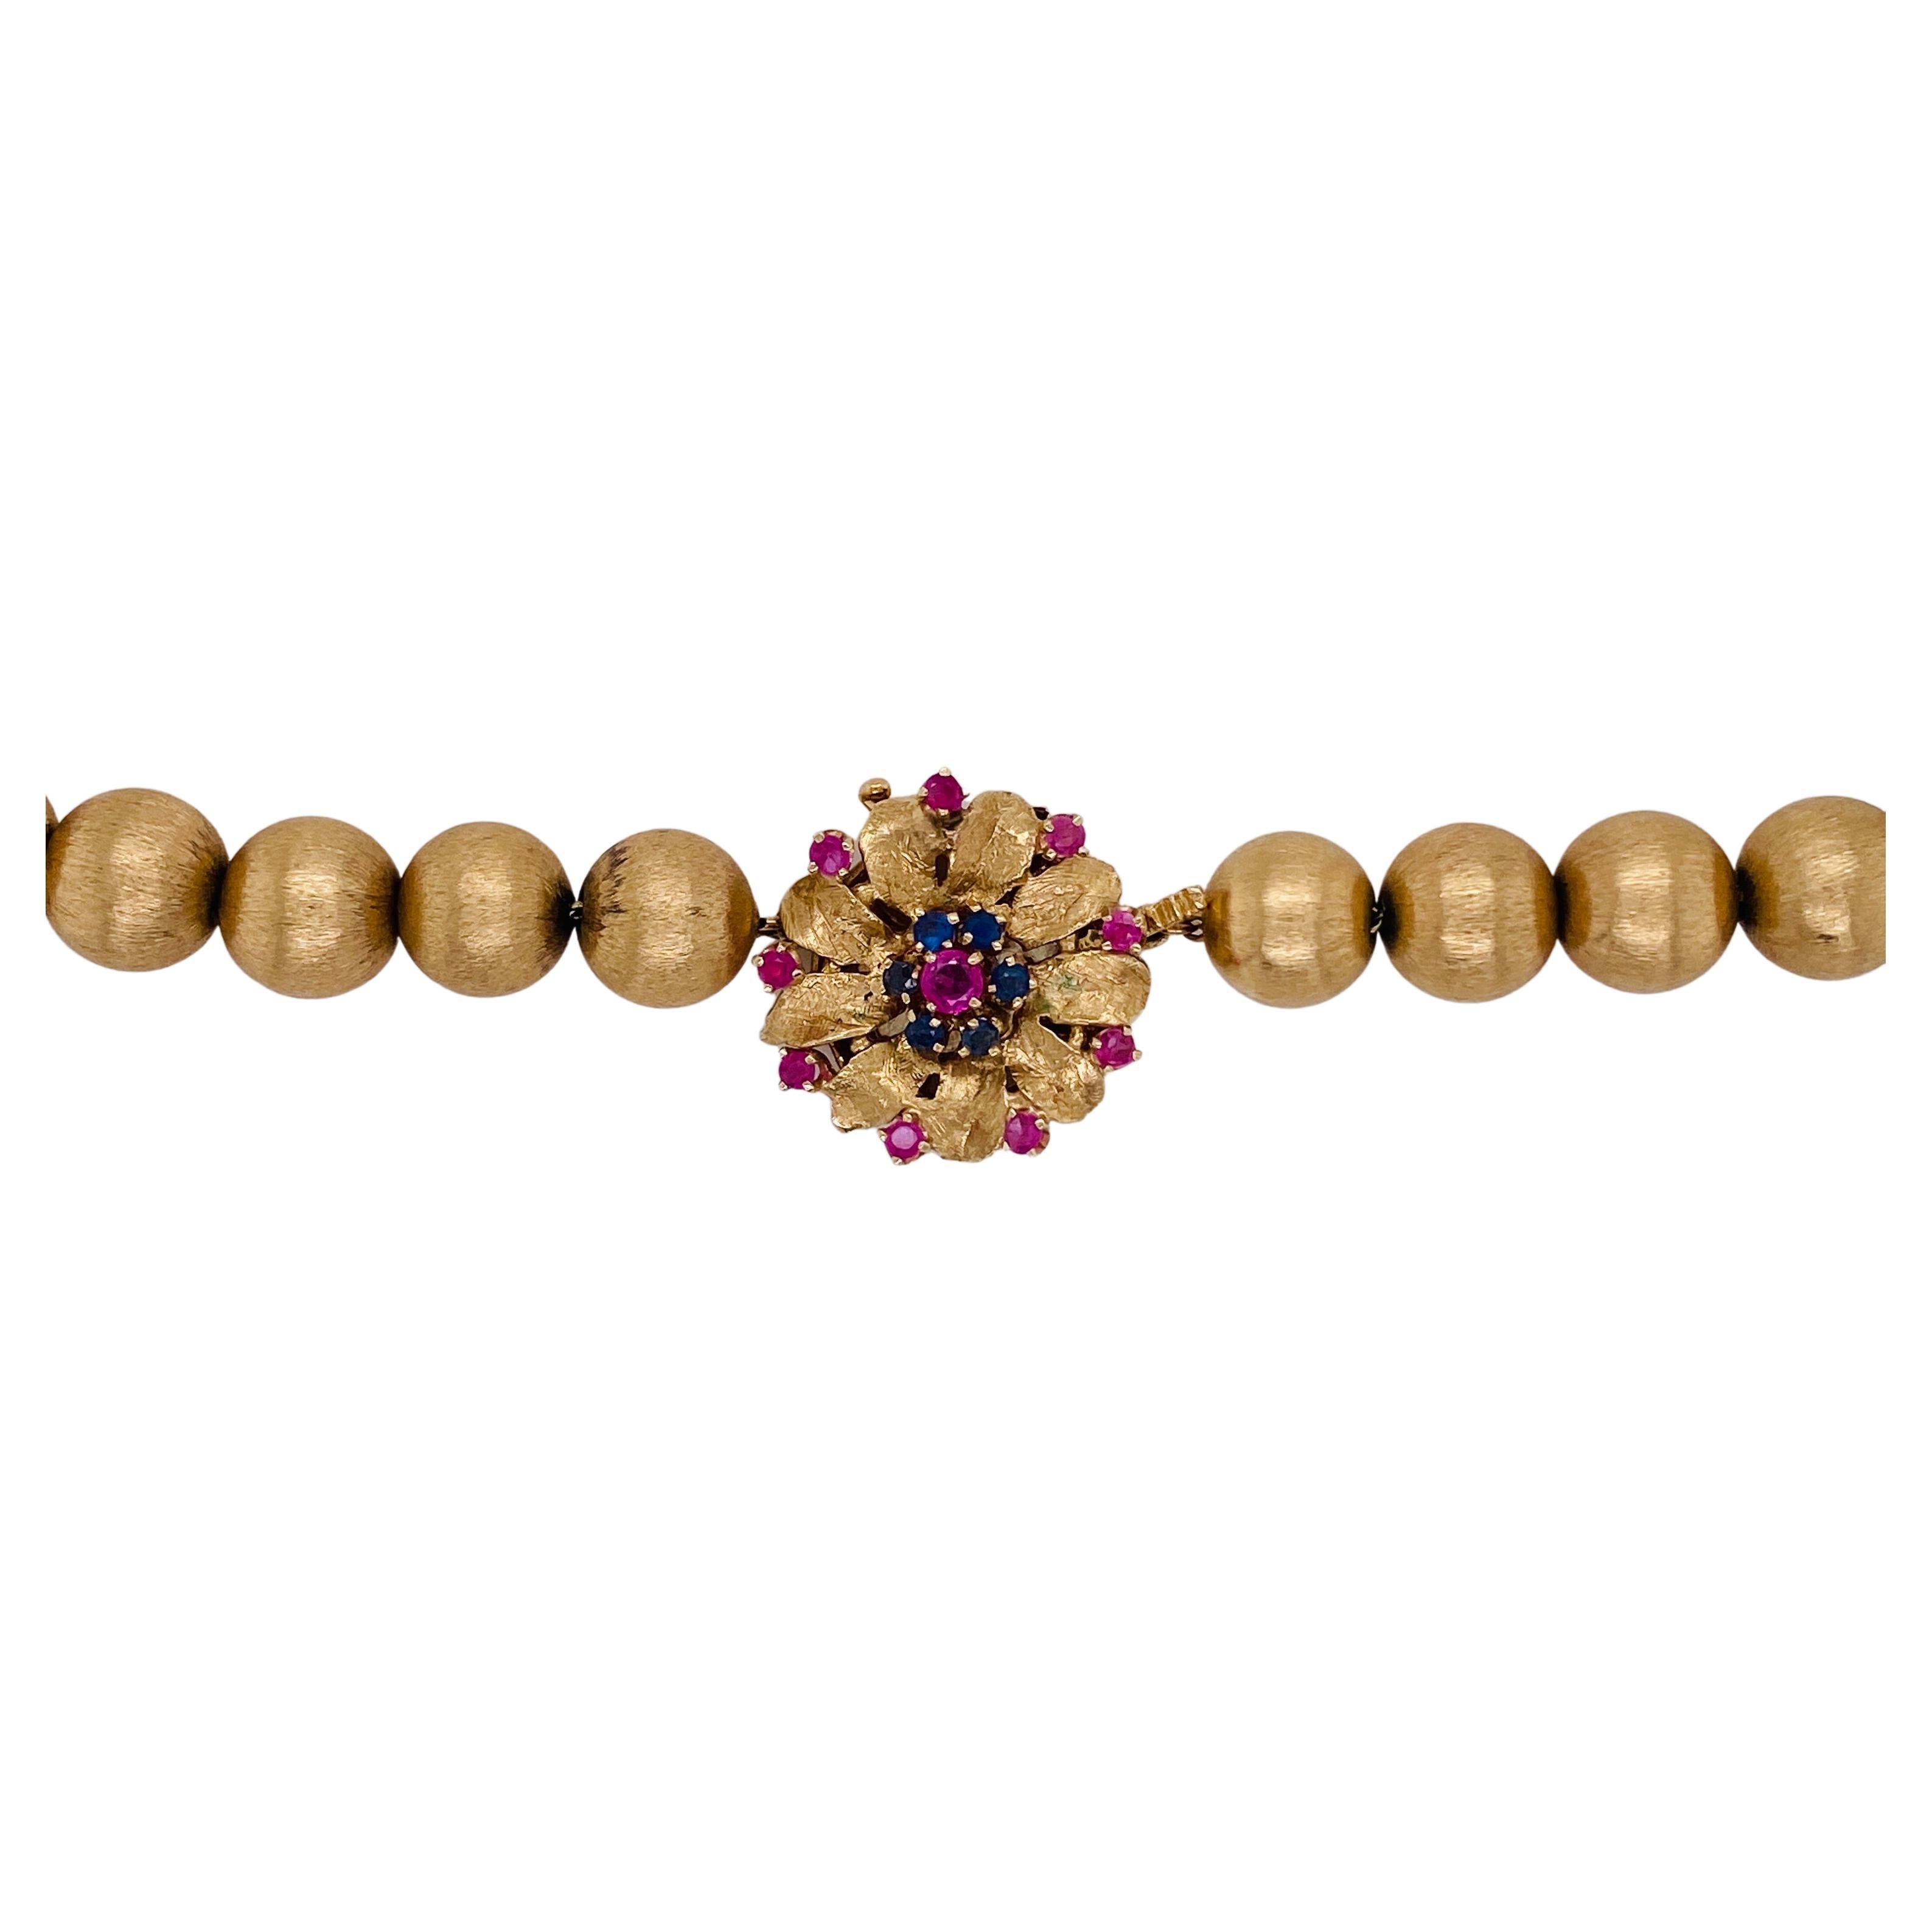 If you want a significant gold necklace, this is the one for you. Beautifully brushed 9 millimeter beads make up the length and there is a gorgeous 19 millimeter diameter gold clasp that is embellished with 9 rubies, 6 sapphires and one larger ruby